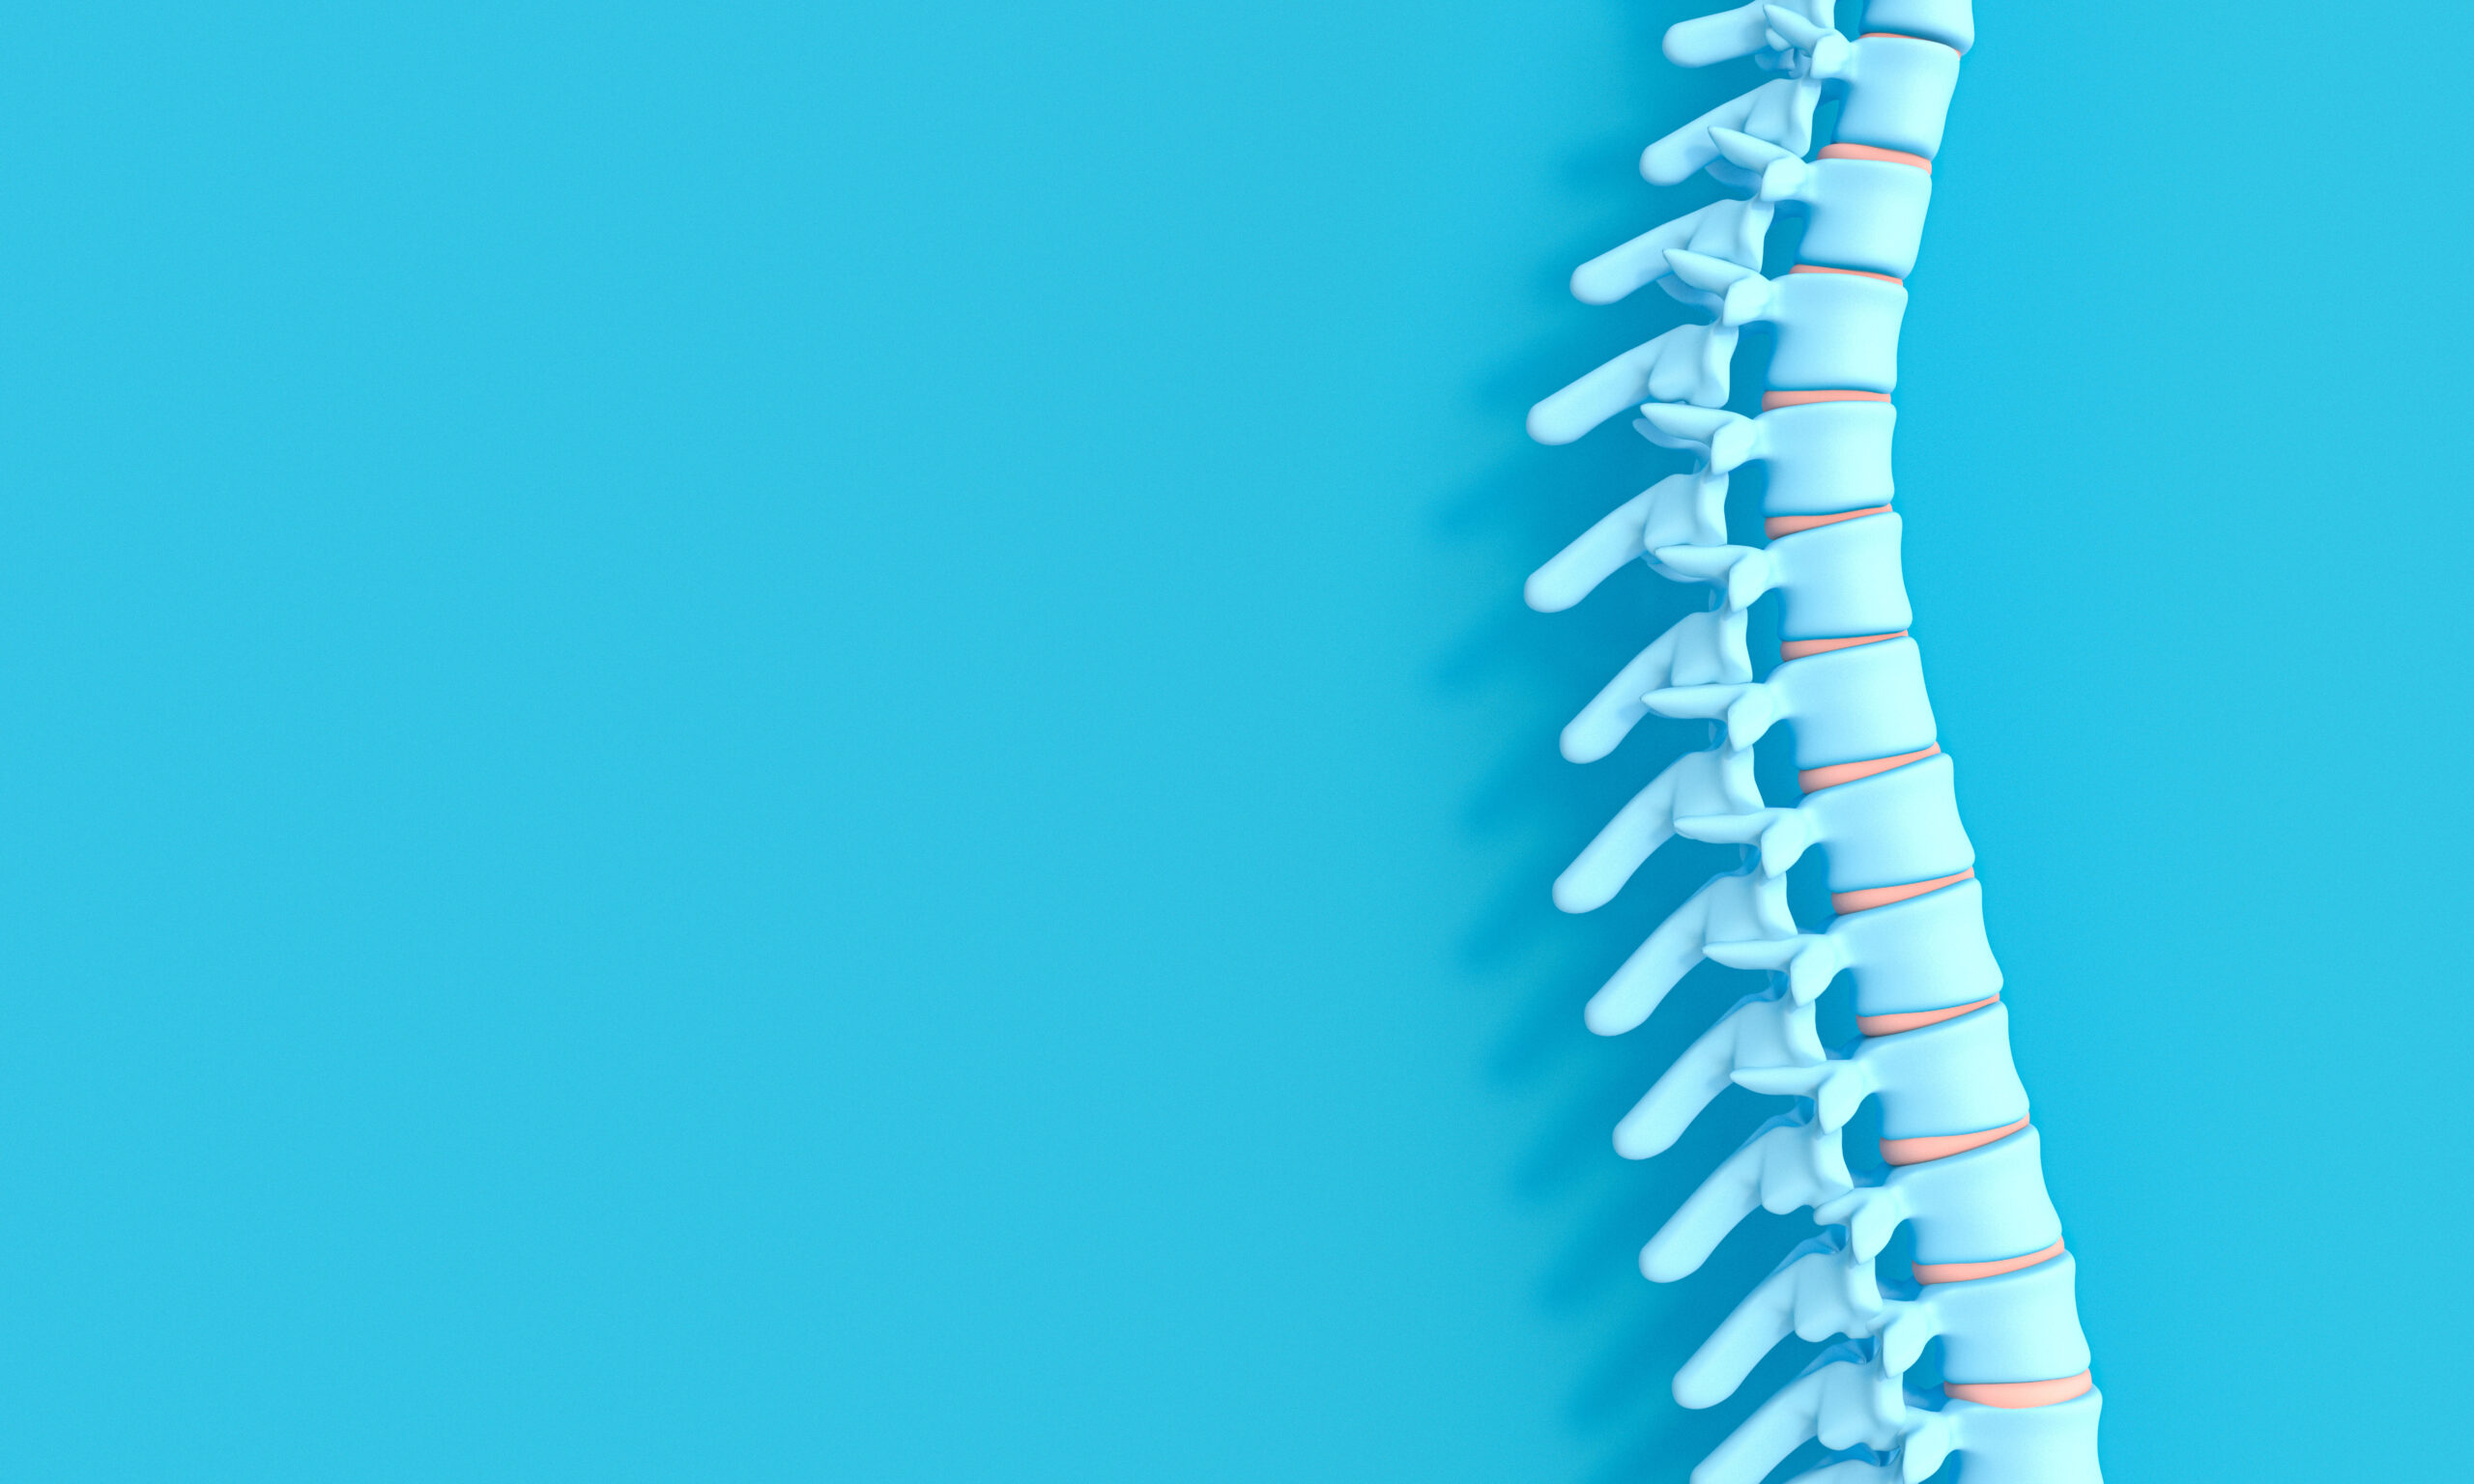 Wiggling molecules; the cure for spinal cord injuries?